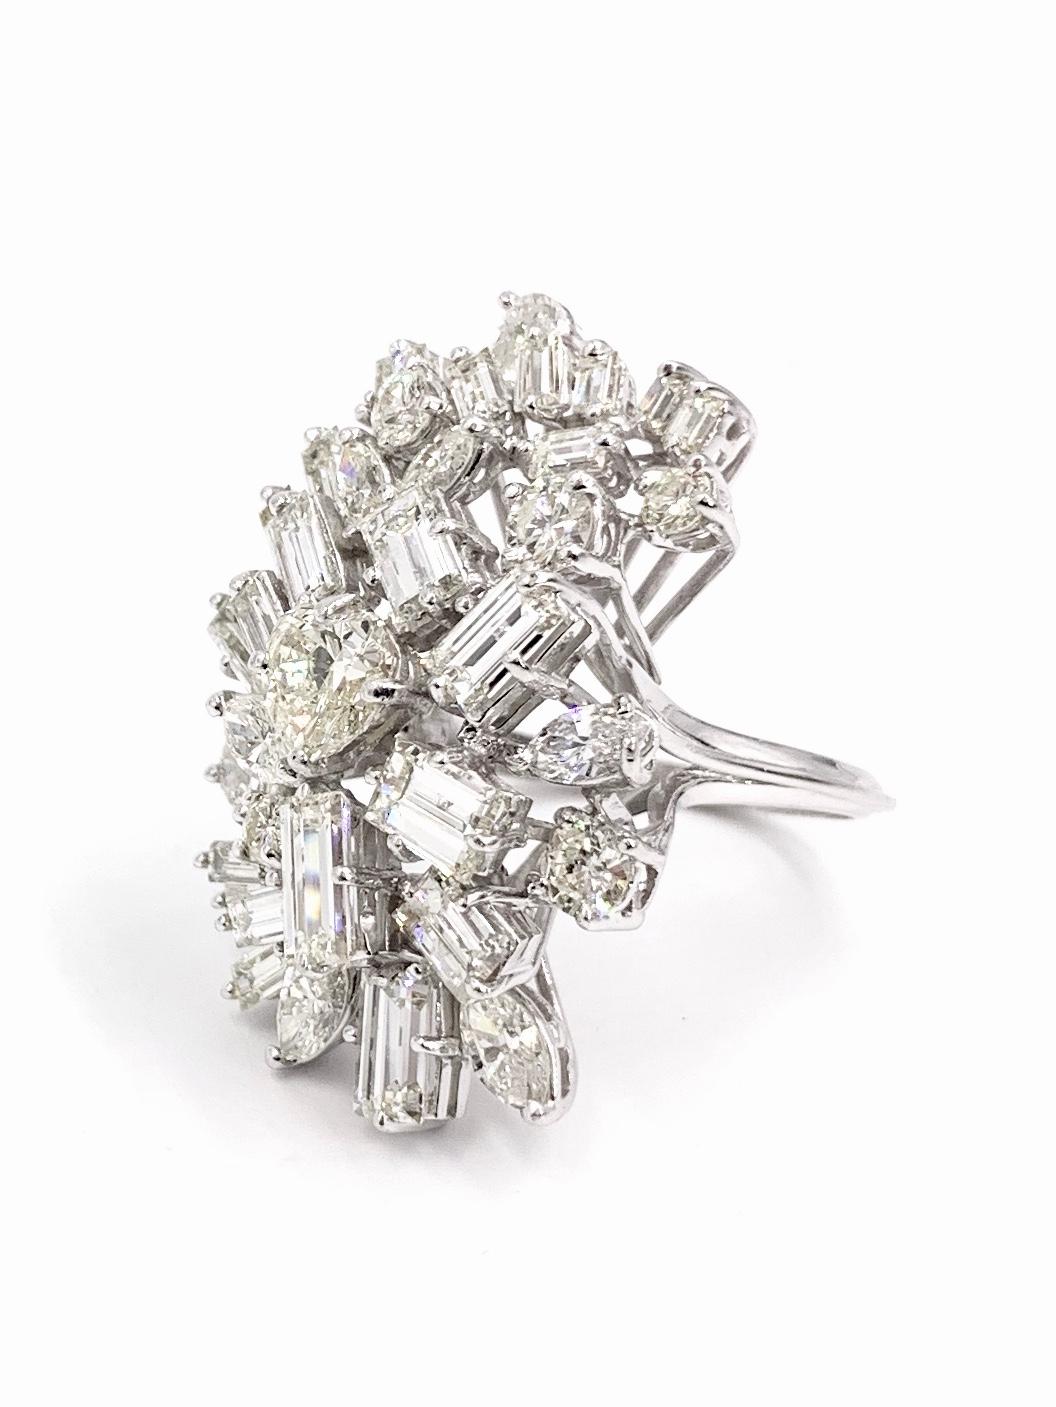 A dramatic showstopping vintage platinum diamond spray ring composed of approximately 8.75 carats of fancy cut and round brilliant white diamonds. Center of ring features a heart shape diamond weighing approximately .75 carats at approximately H